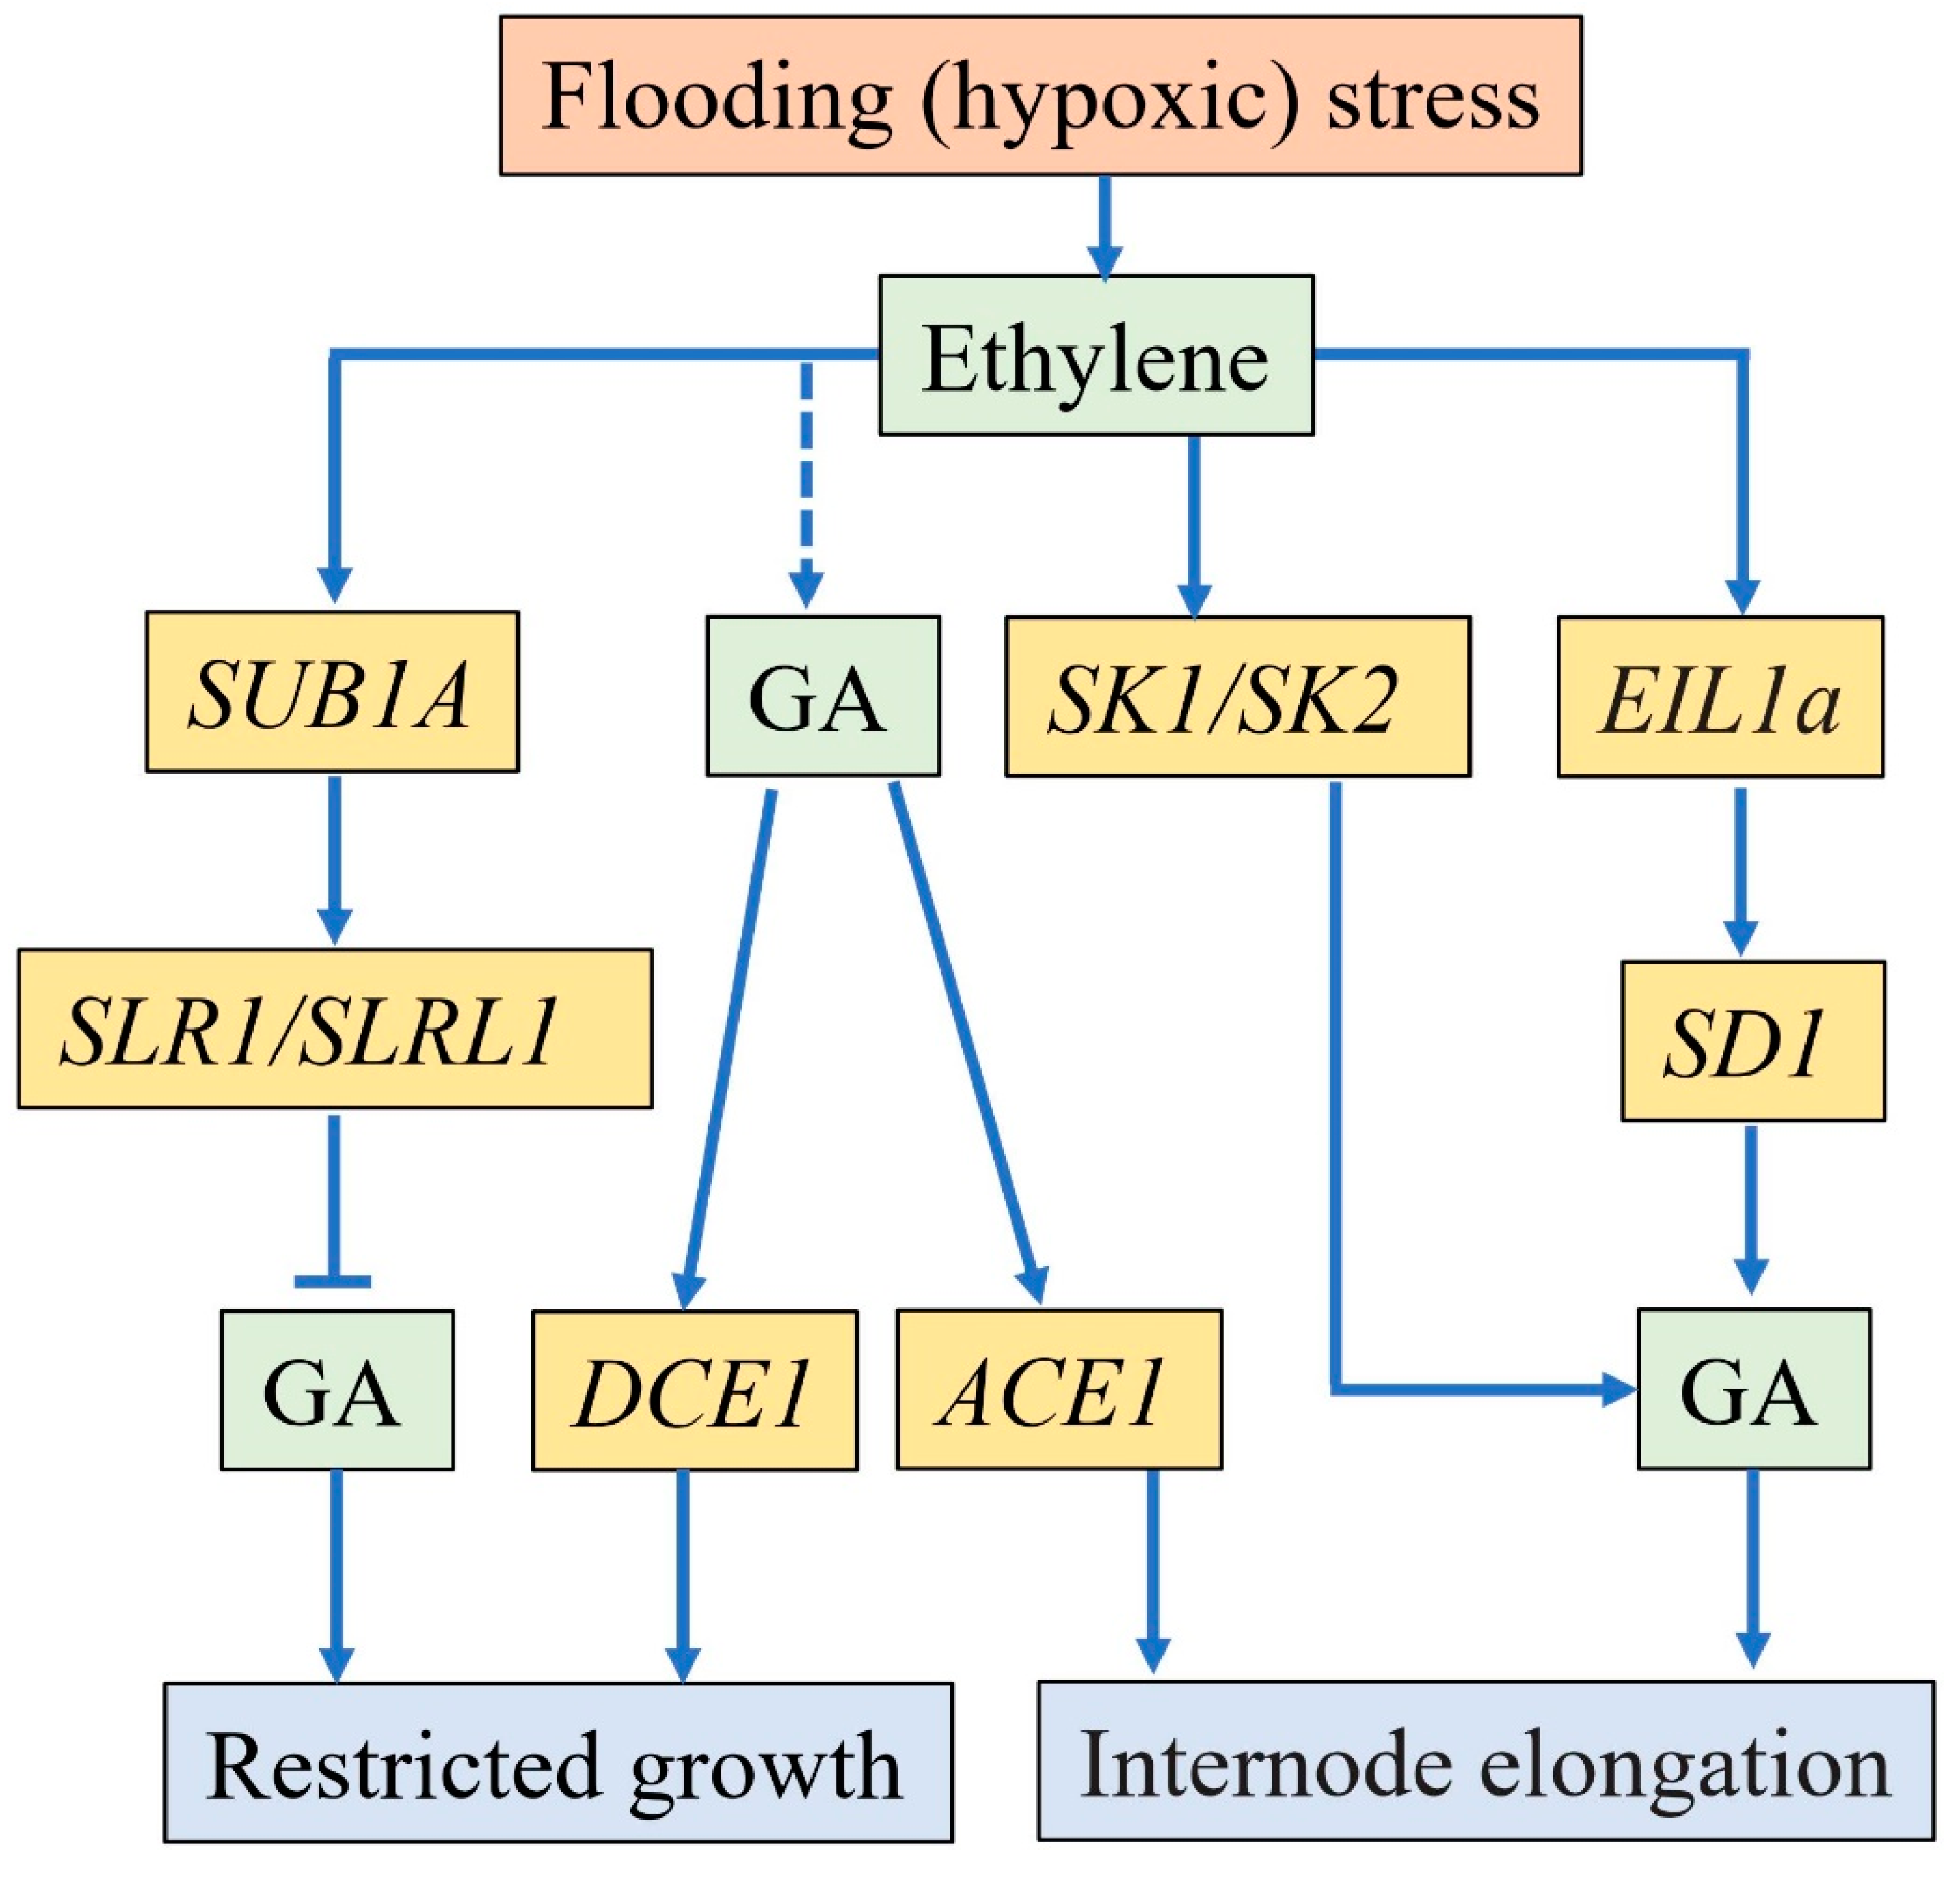 IJMS | Free Full-Text | Plant Morphological, Physiological and Anatomical  Adaption to Flooding Stress and the Underlying Molecular Mechanisms | HTML